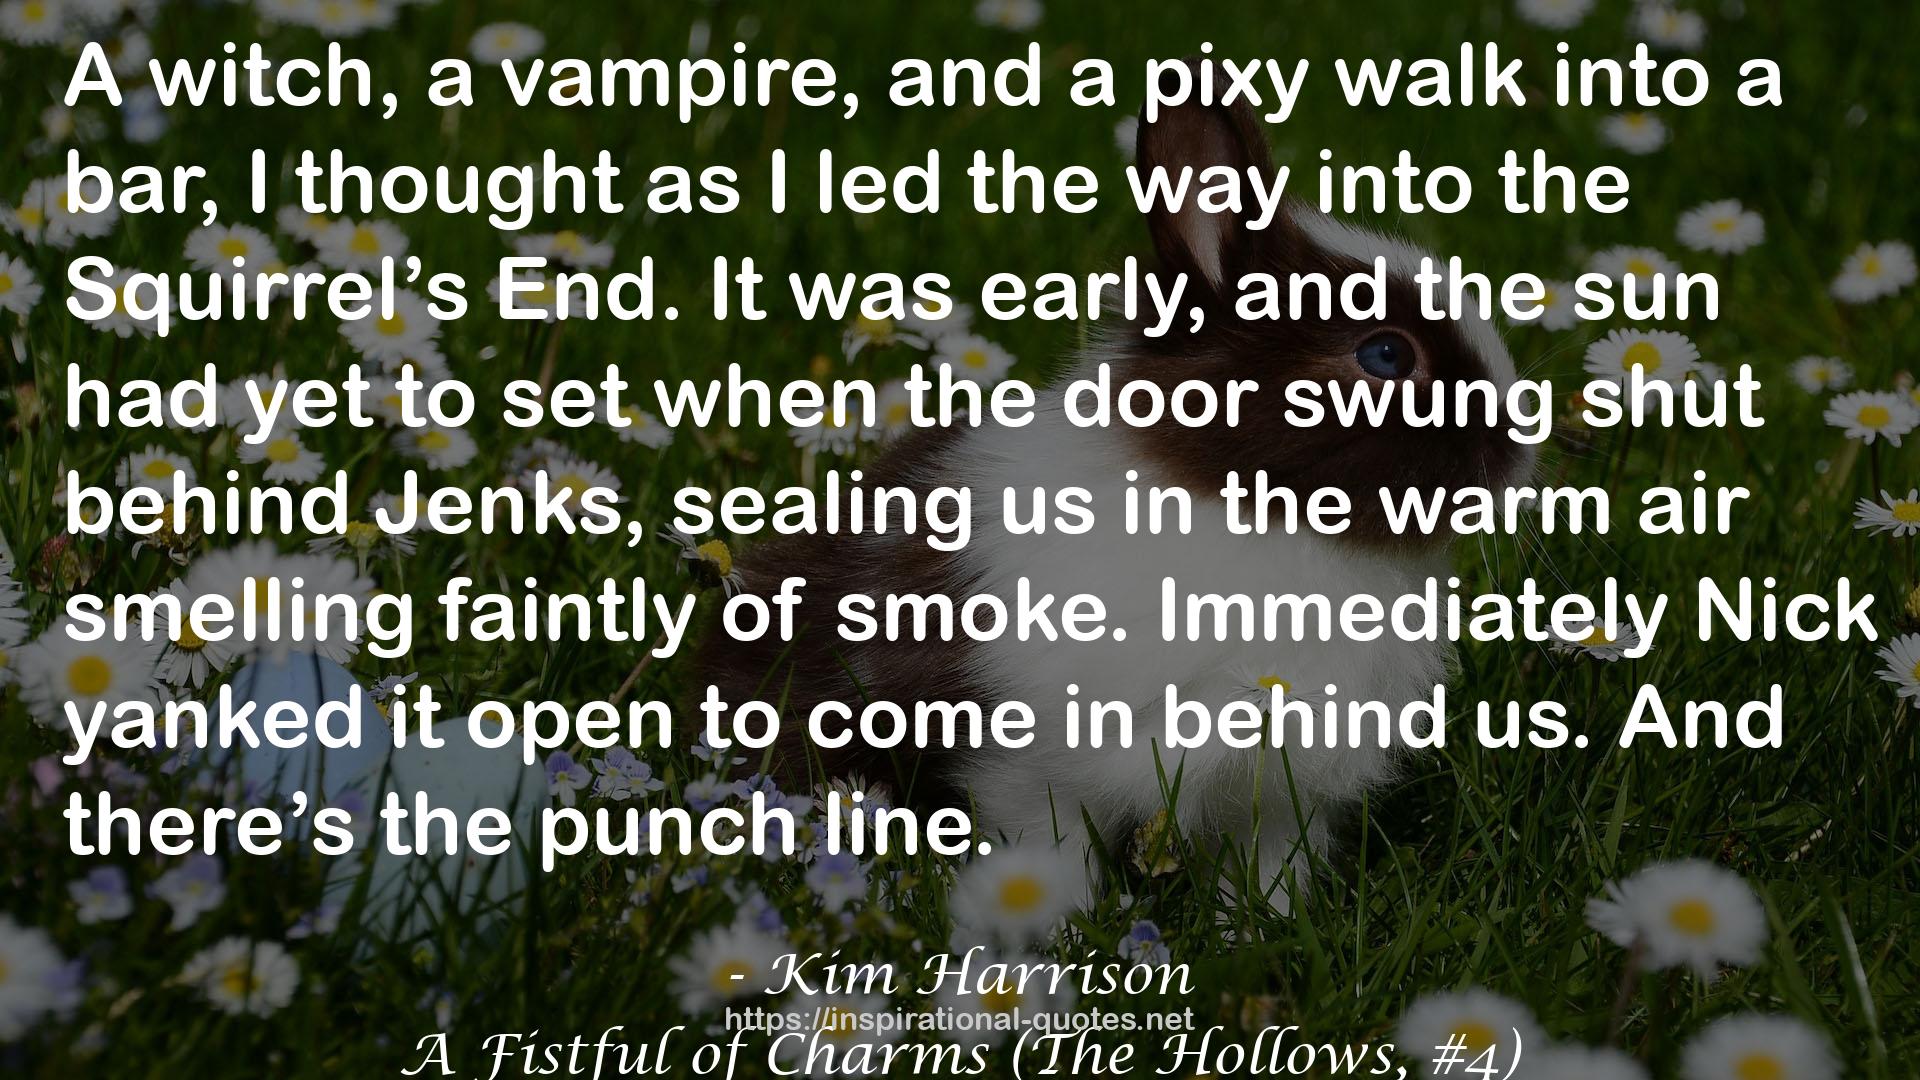 A Fistful of Charms (The Hollows, #4) QUOTES